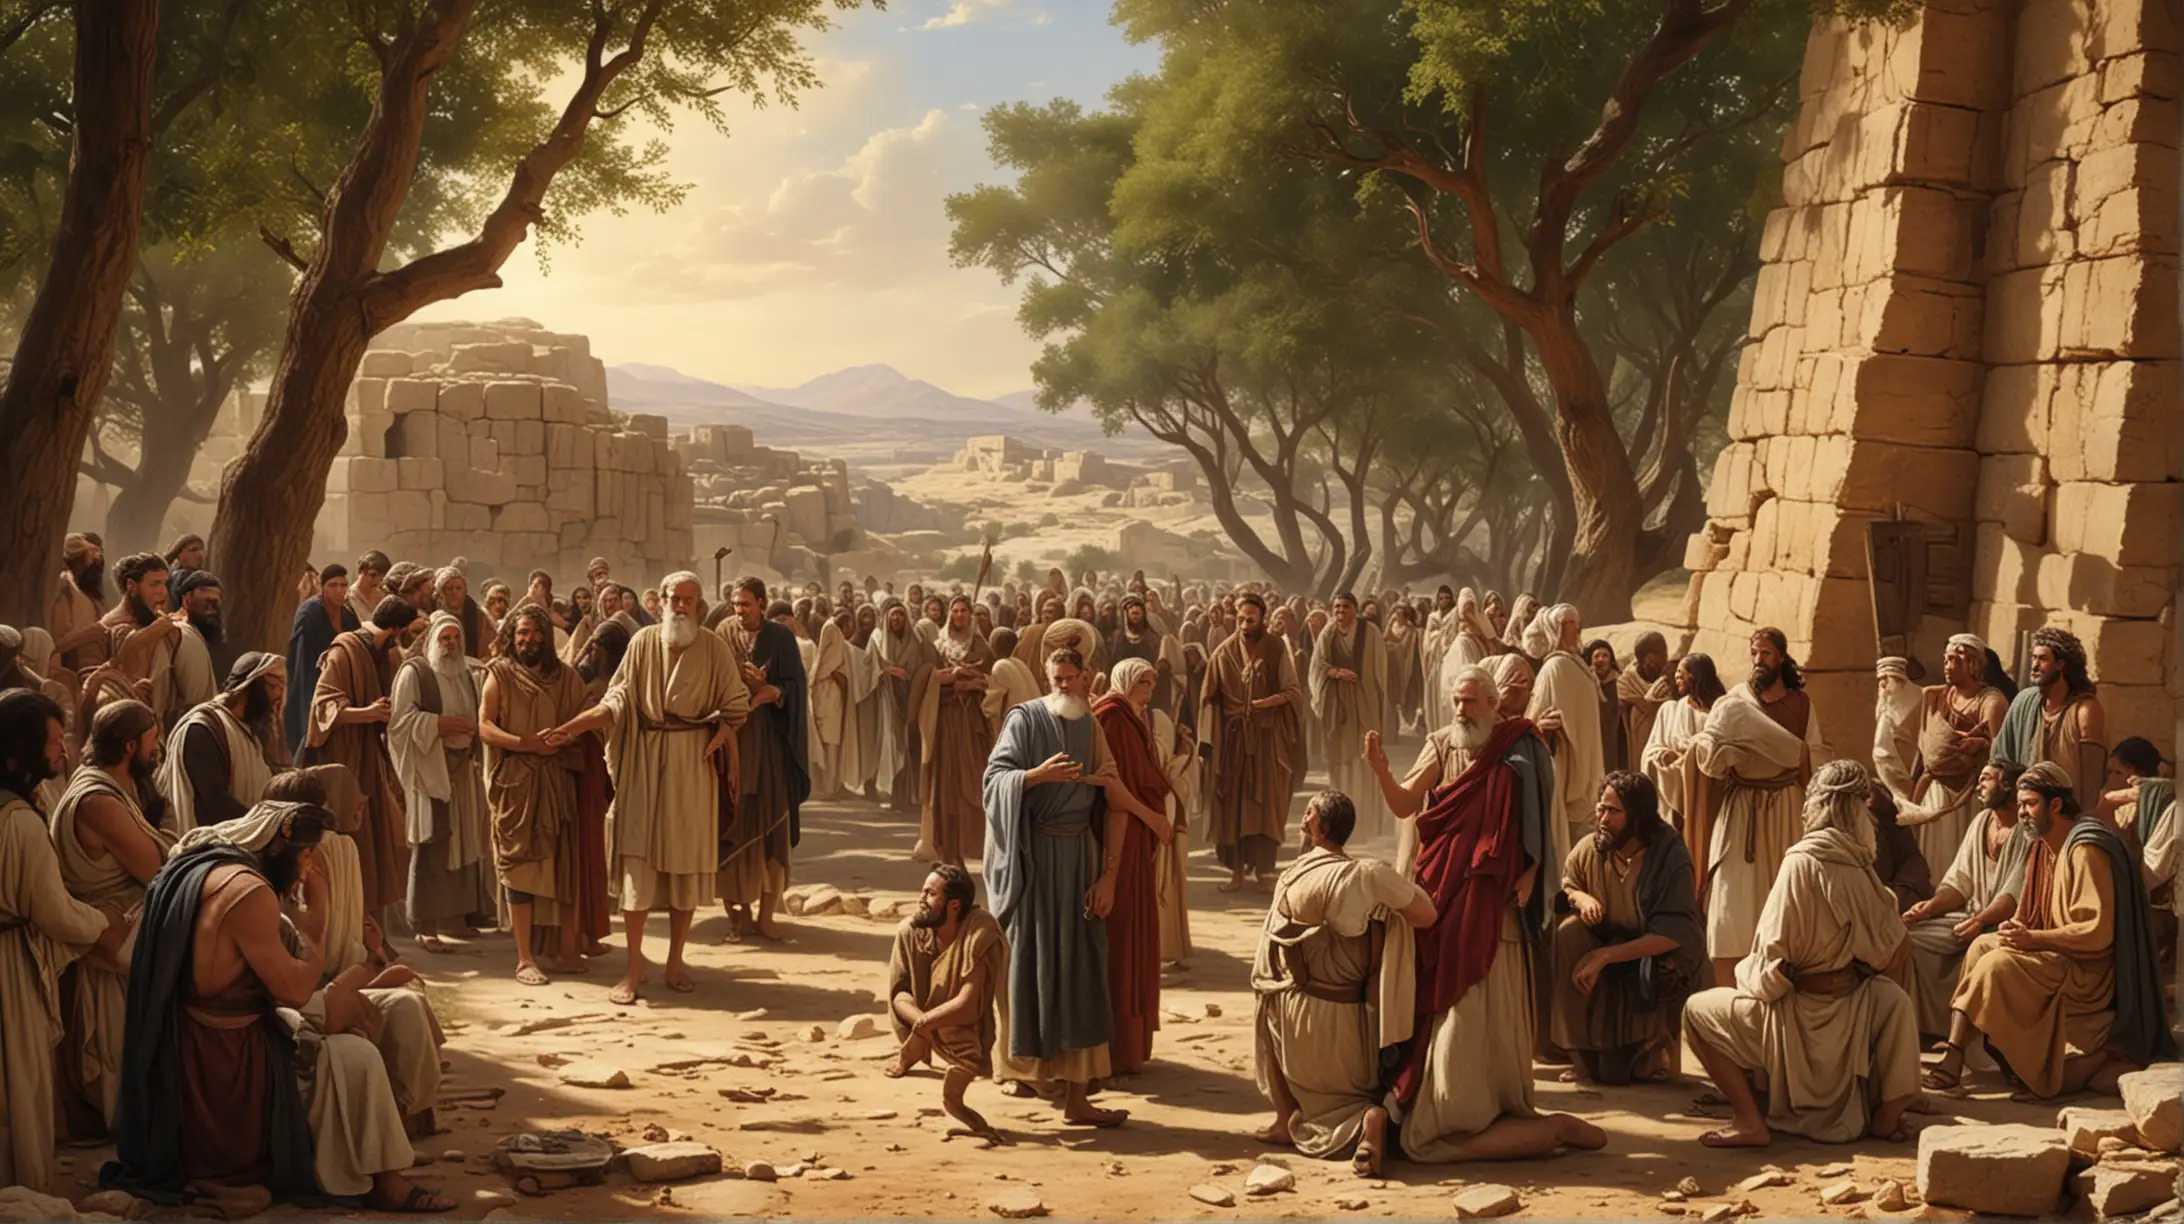 a small group of people gatherd of Solomon's Set during the biblical era of Elijah.